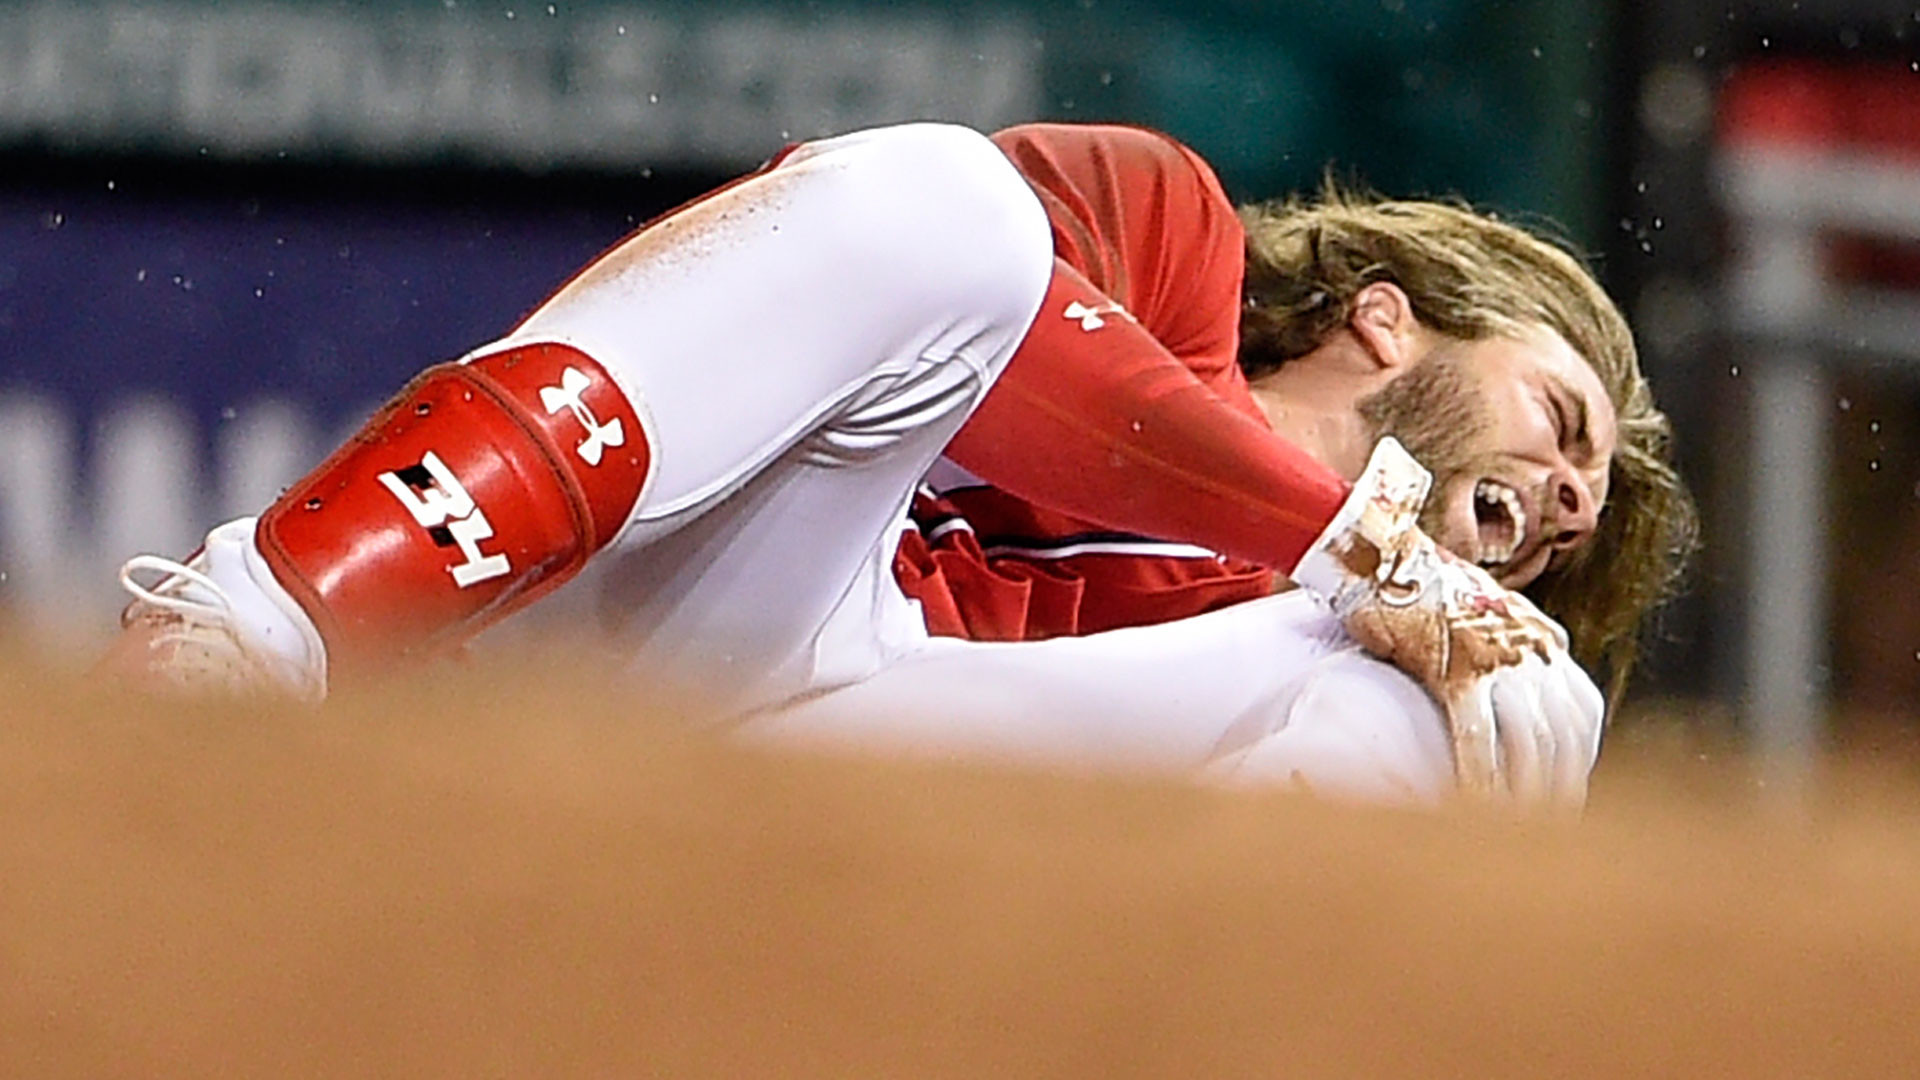 Bryce Harper suffered no ligament damage, but has significant bone bruise NBCS Bay Area